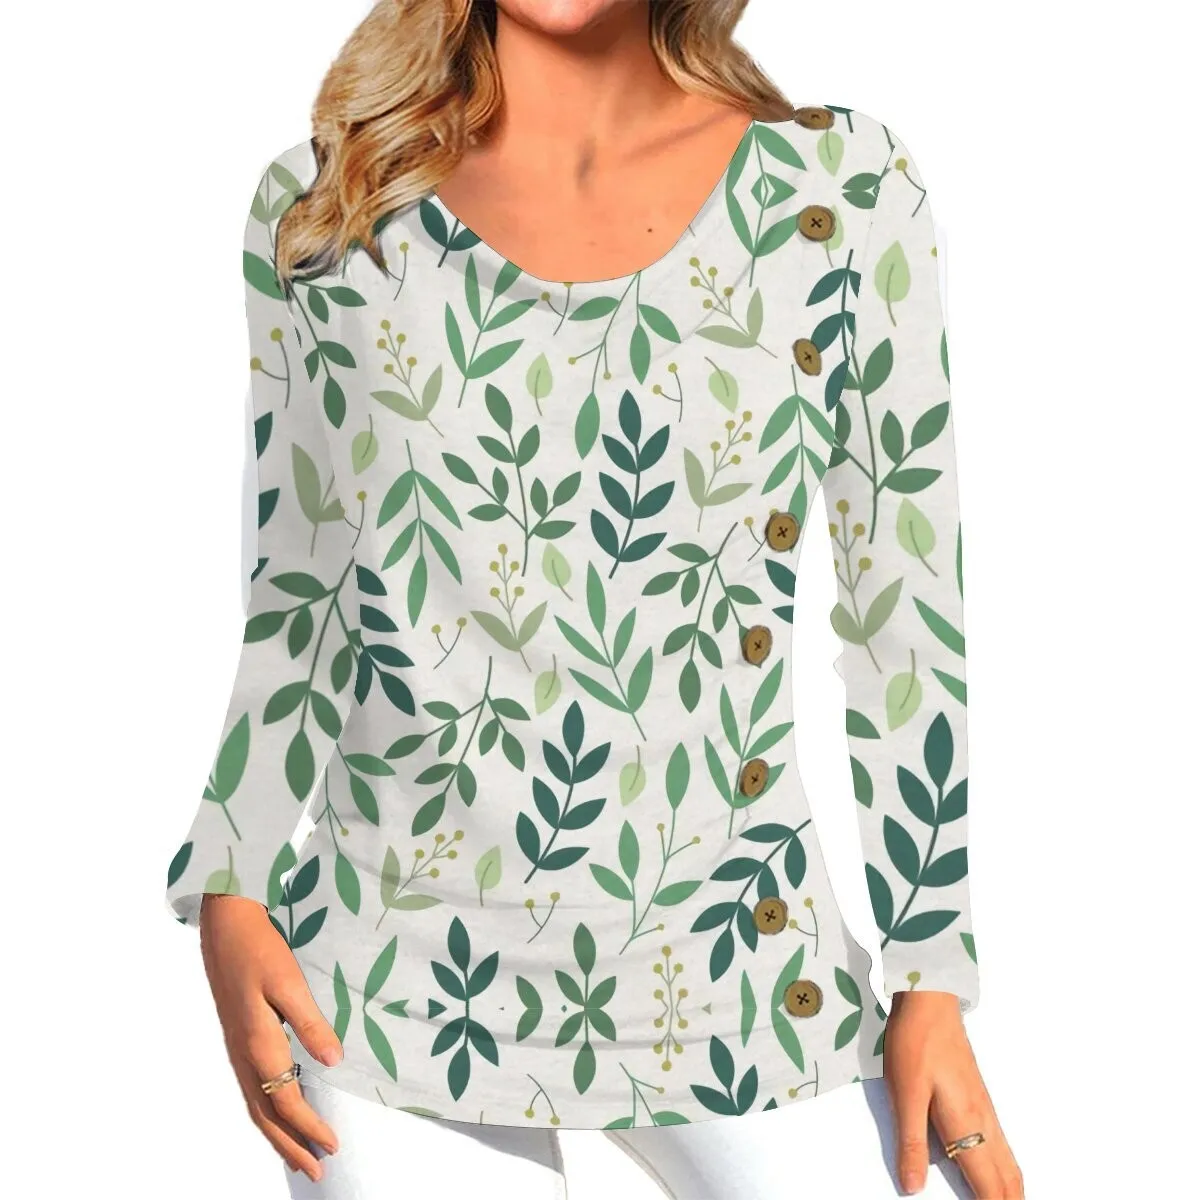 

Women'S Long Sleeve Tops Autumn Asymmetrical Floral Printed T-Shirts Slim Fit Casual Tops Swing Neck Side Buttons Blouse